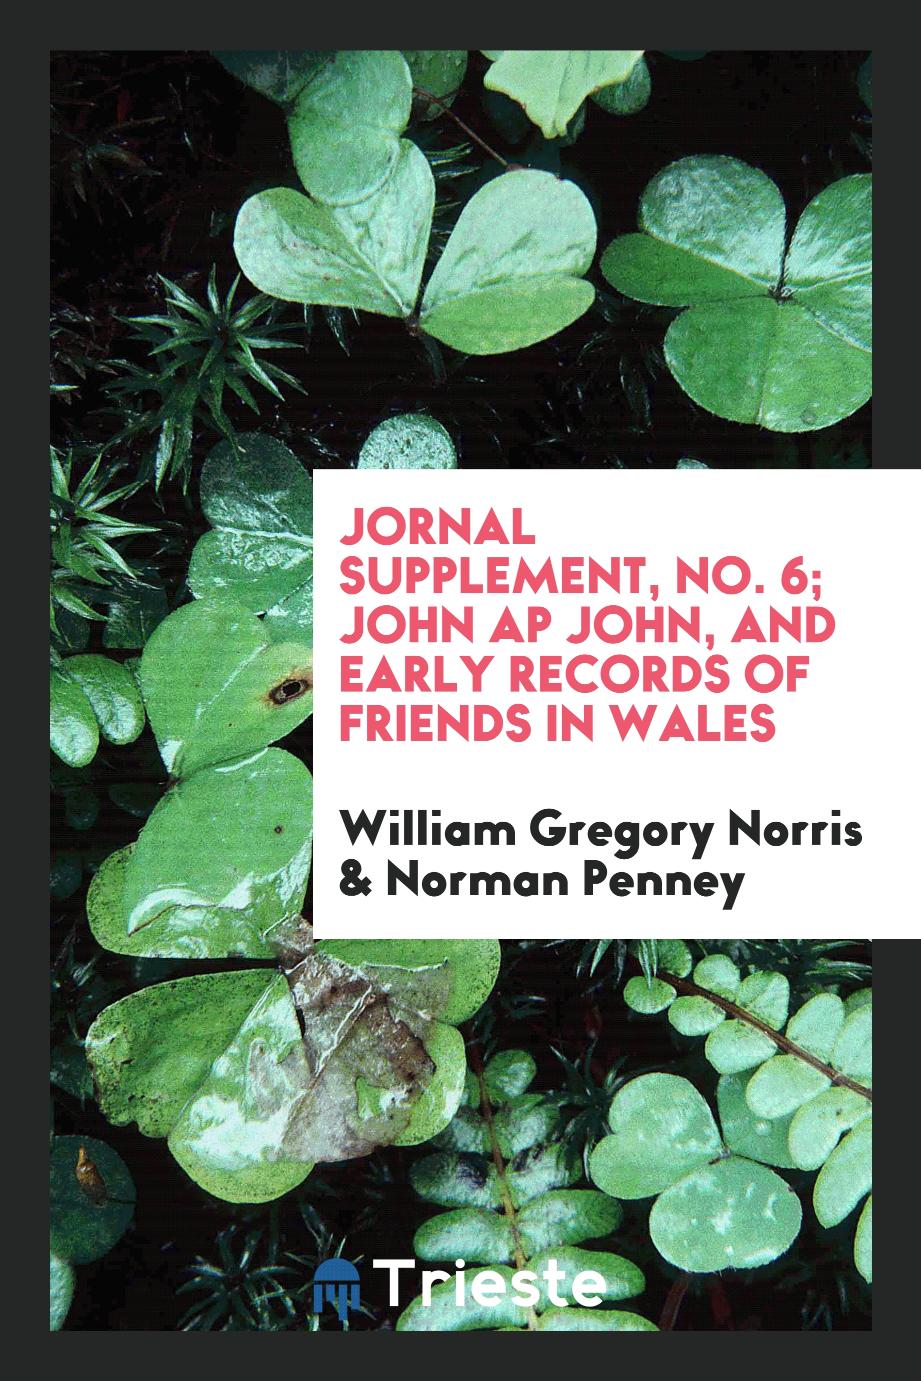 Journal supplement, No. 6; John Ap John, and Early Records of Friends in Wales